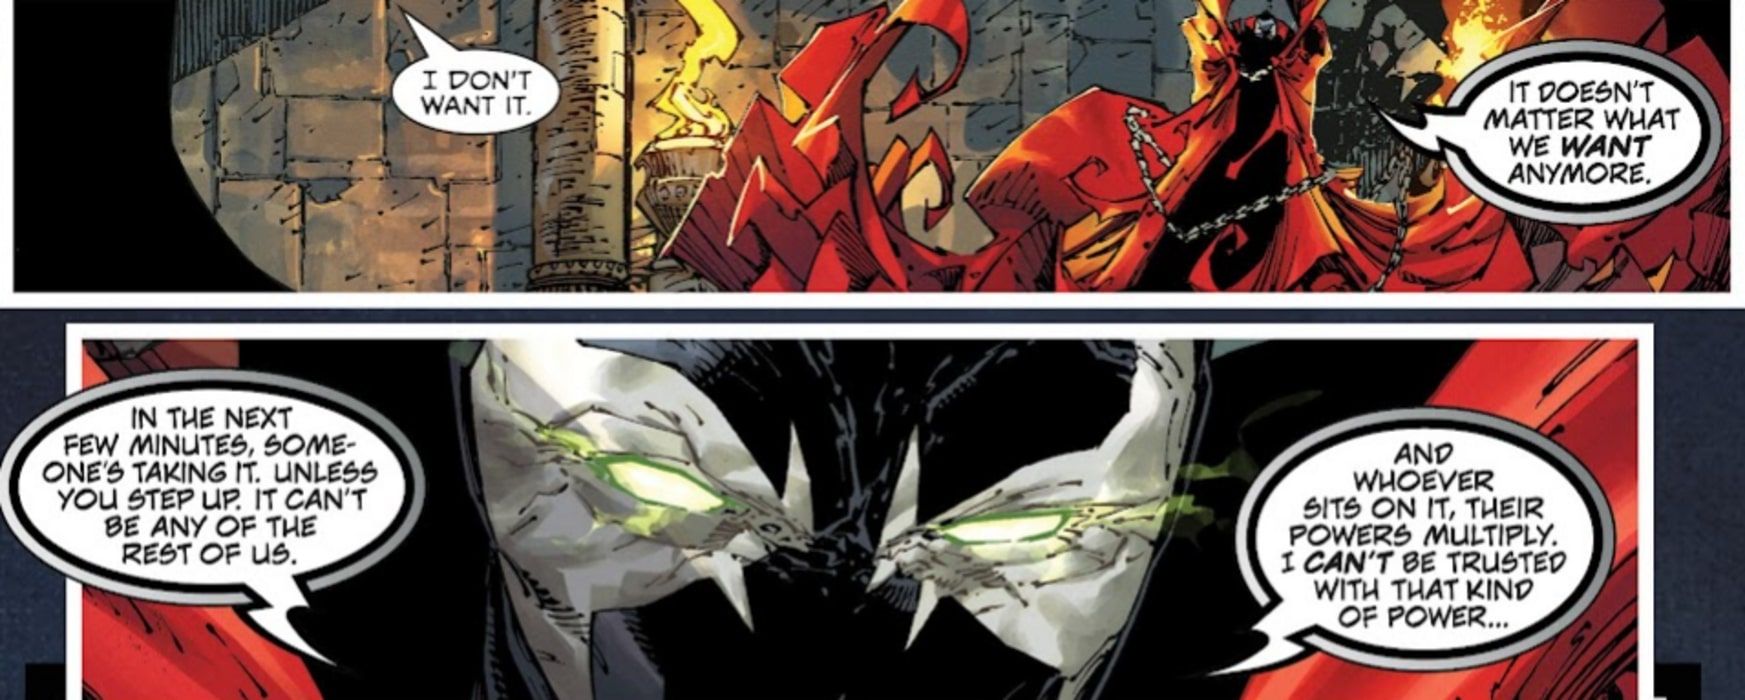 Spawn revealing his plan for the ruler of Hell in Spawn #350